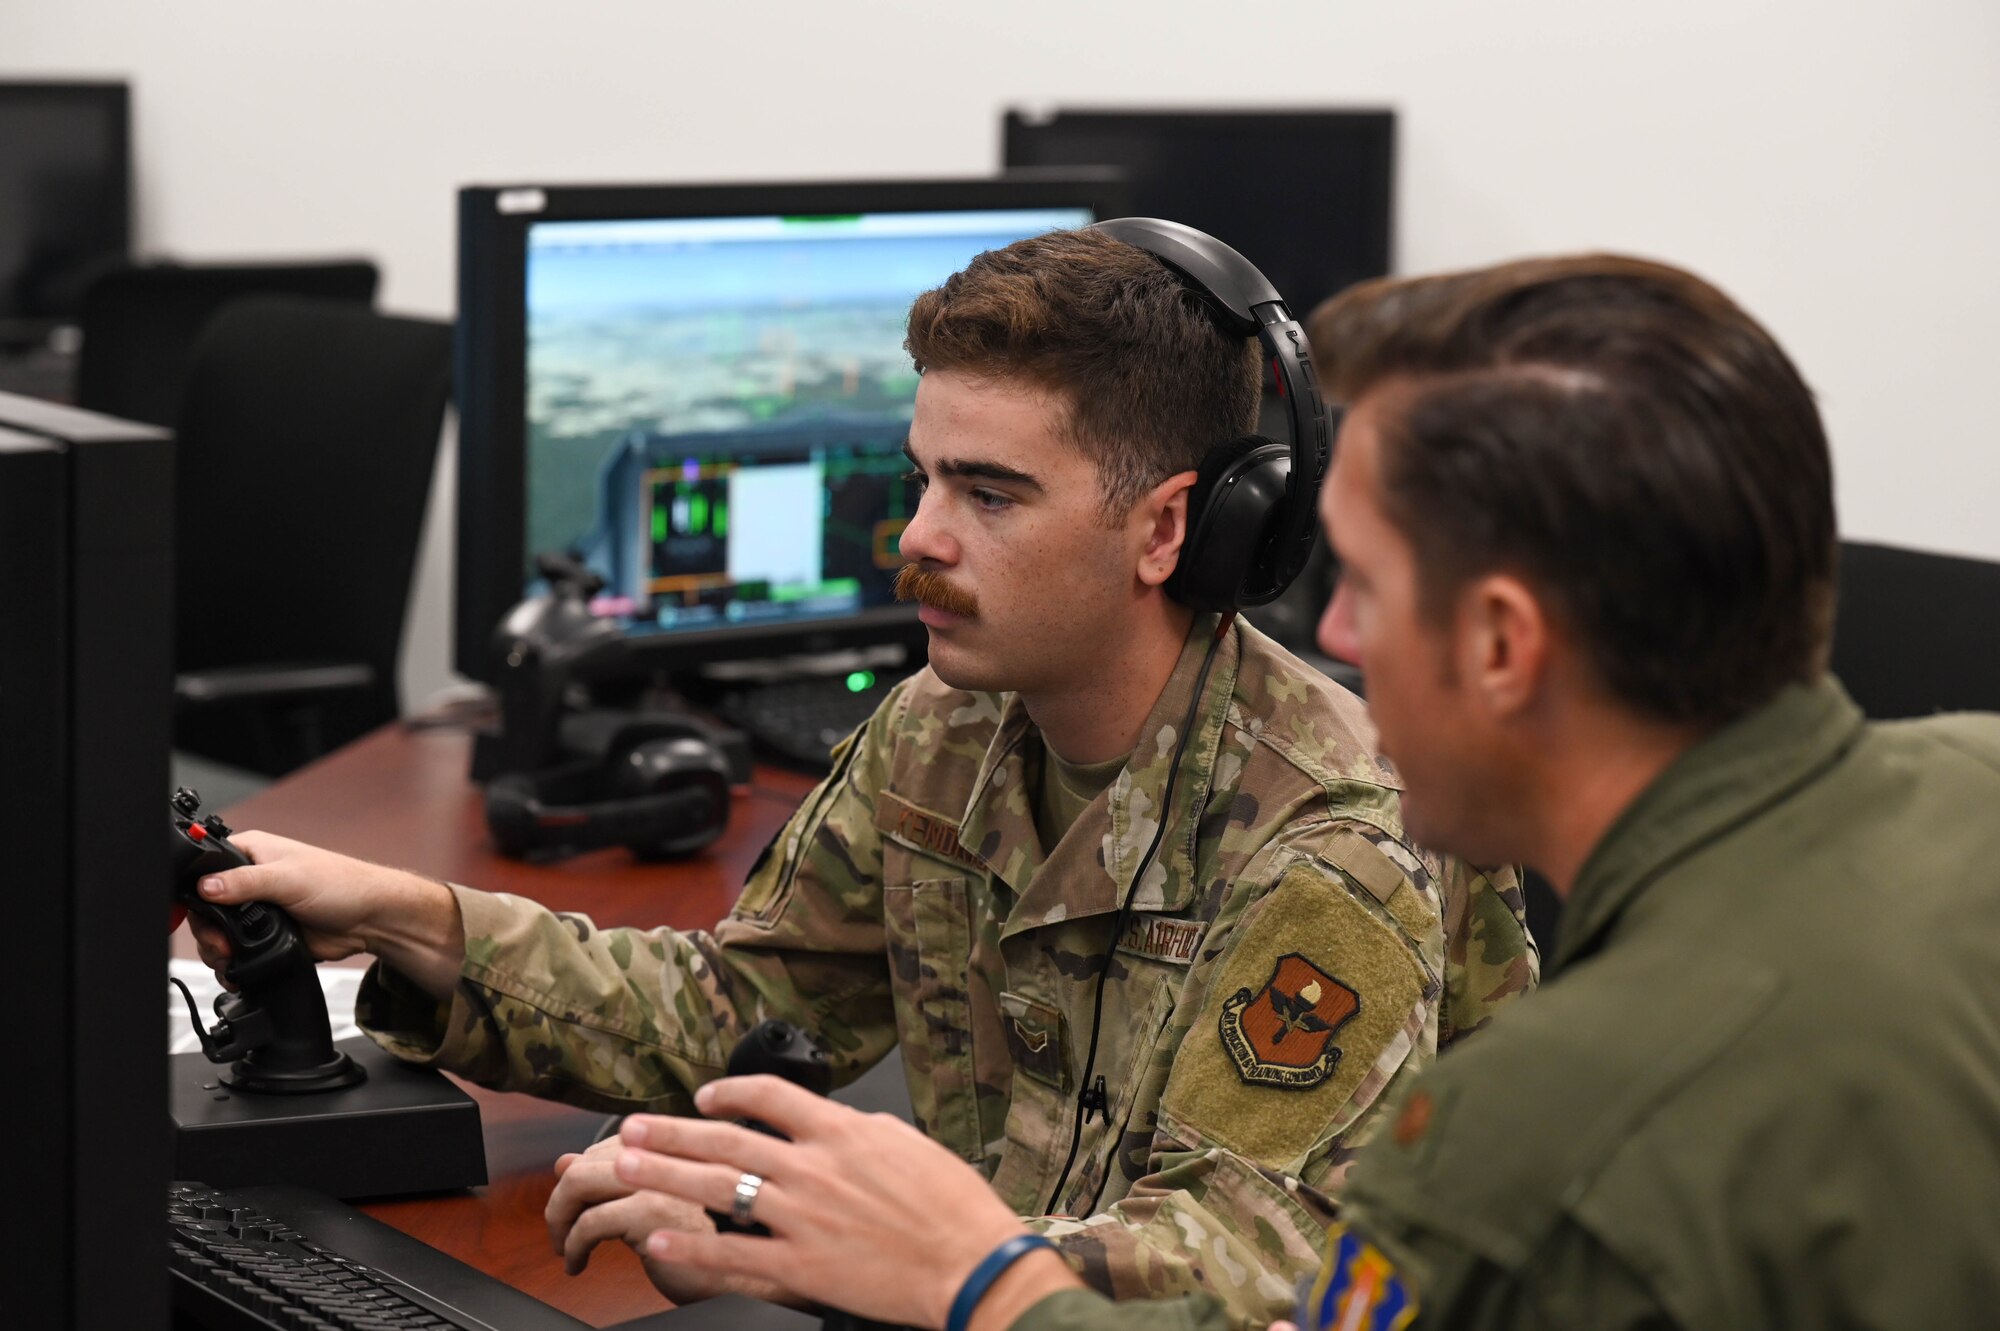 An instructor teaching an airman how to use a simulator during an exercise.